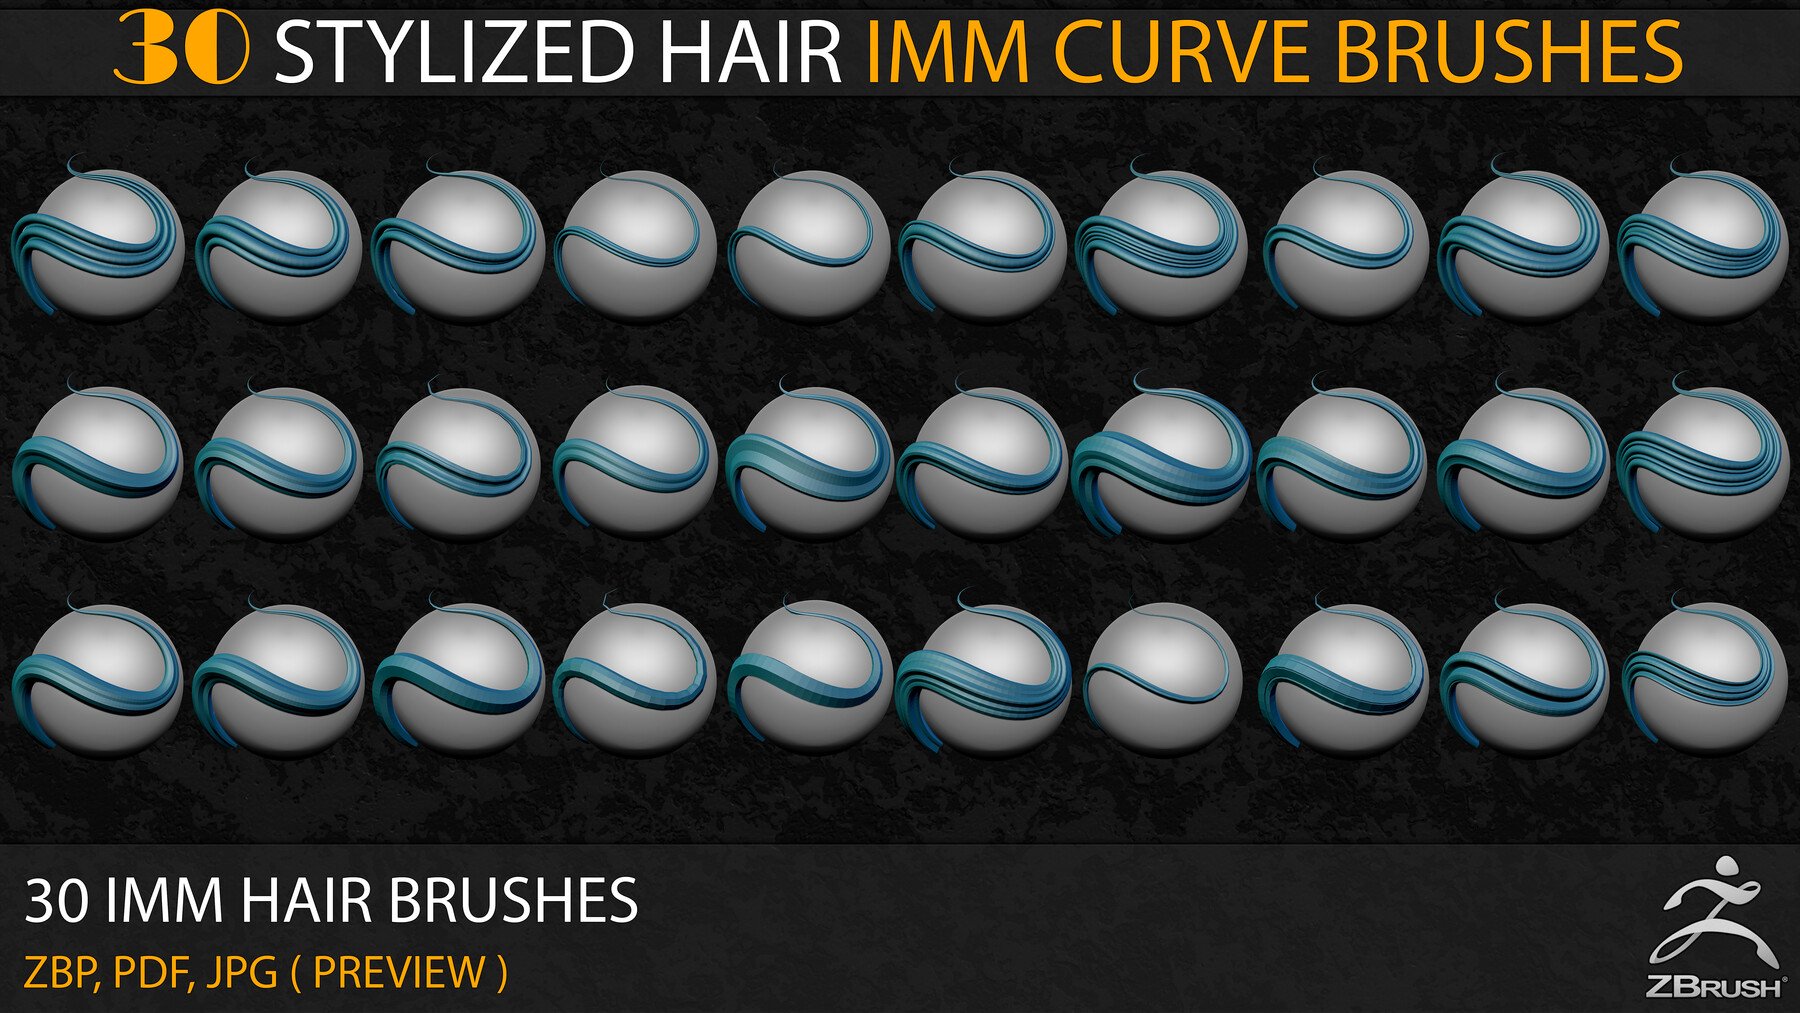 30 Stylized Hair IMM Curve Brushes Vol.3